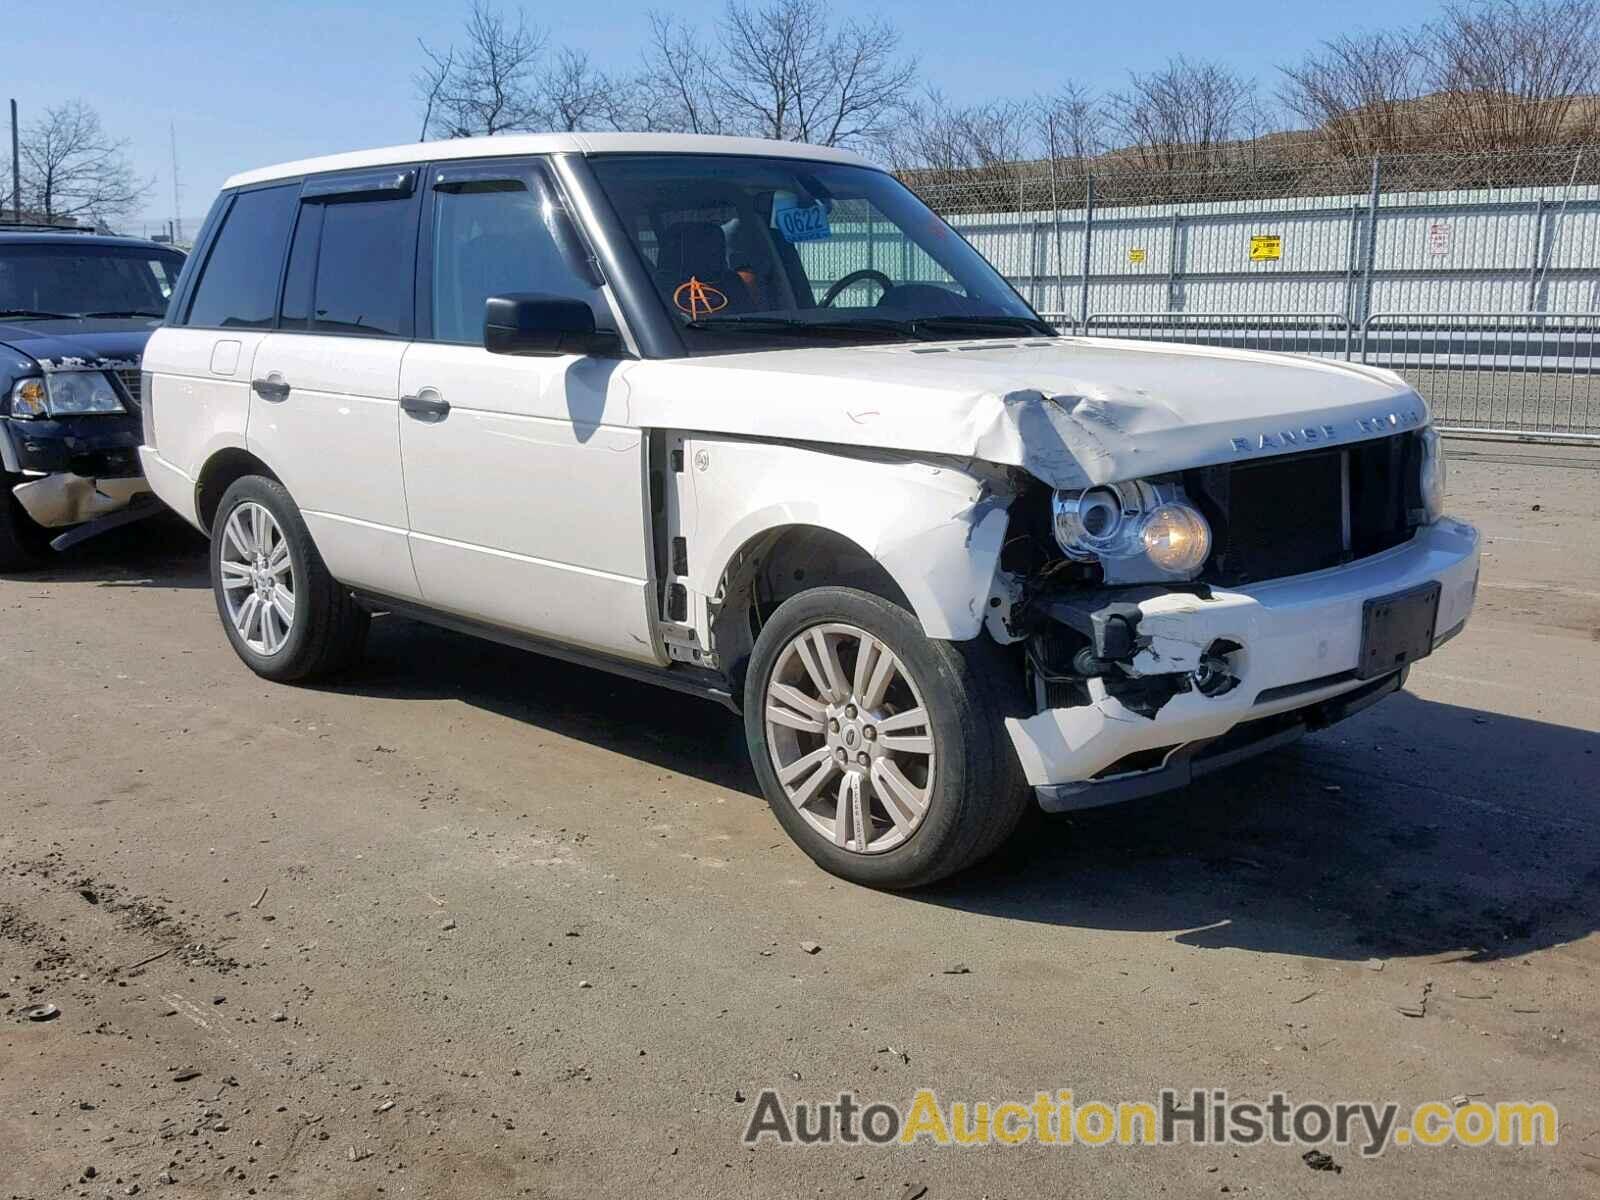 2009 LAND ROVER RANGE ROVER SUPERCHARGED, SALMF13489A304679